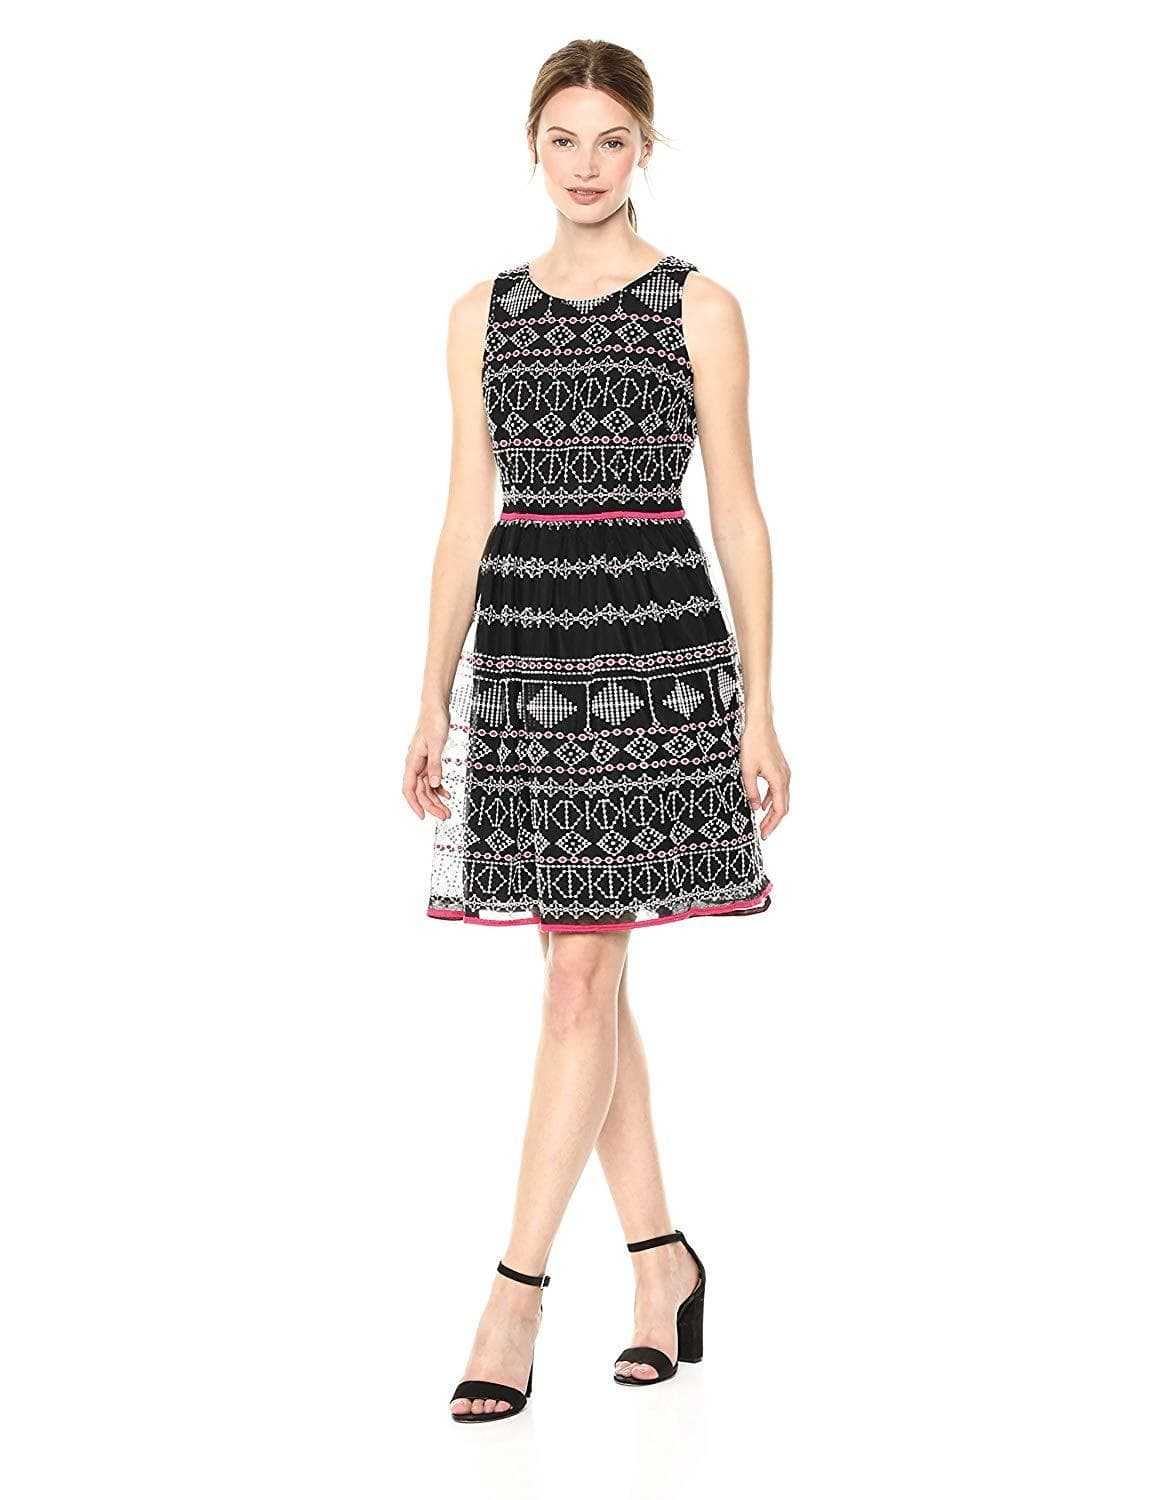 Taylor, Taylor - 9722M Sleeveless Piped Multi-Print A-Line Dress